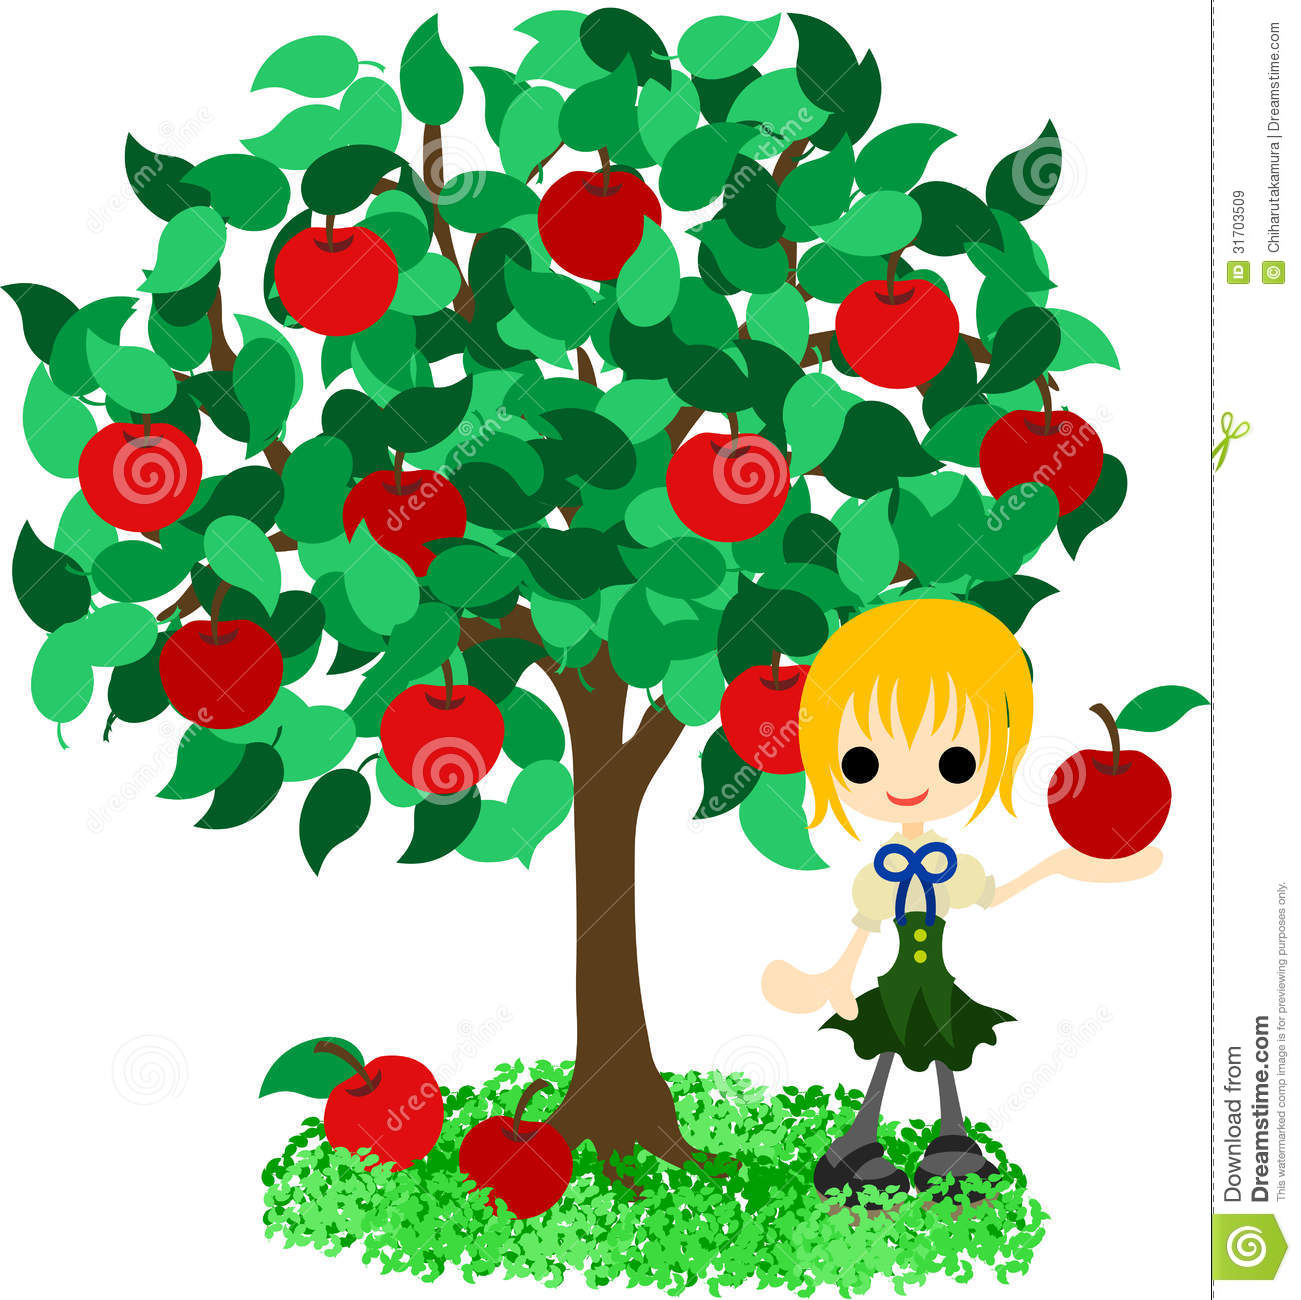 Apple Tree Royalty Free Stock Images   Image  31703509